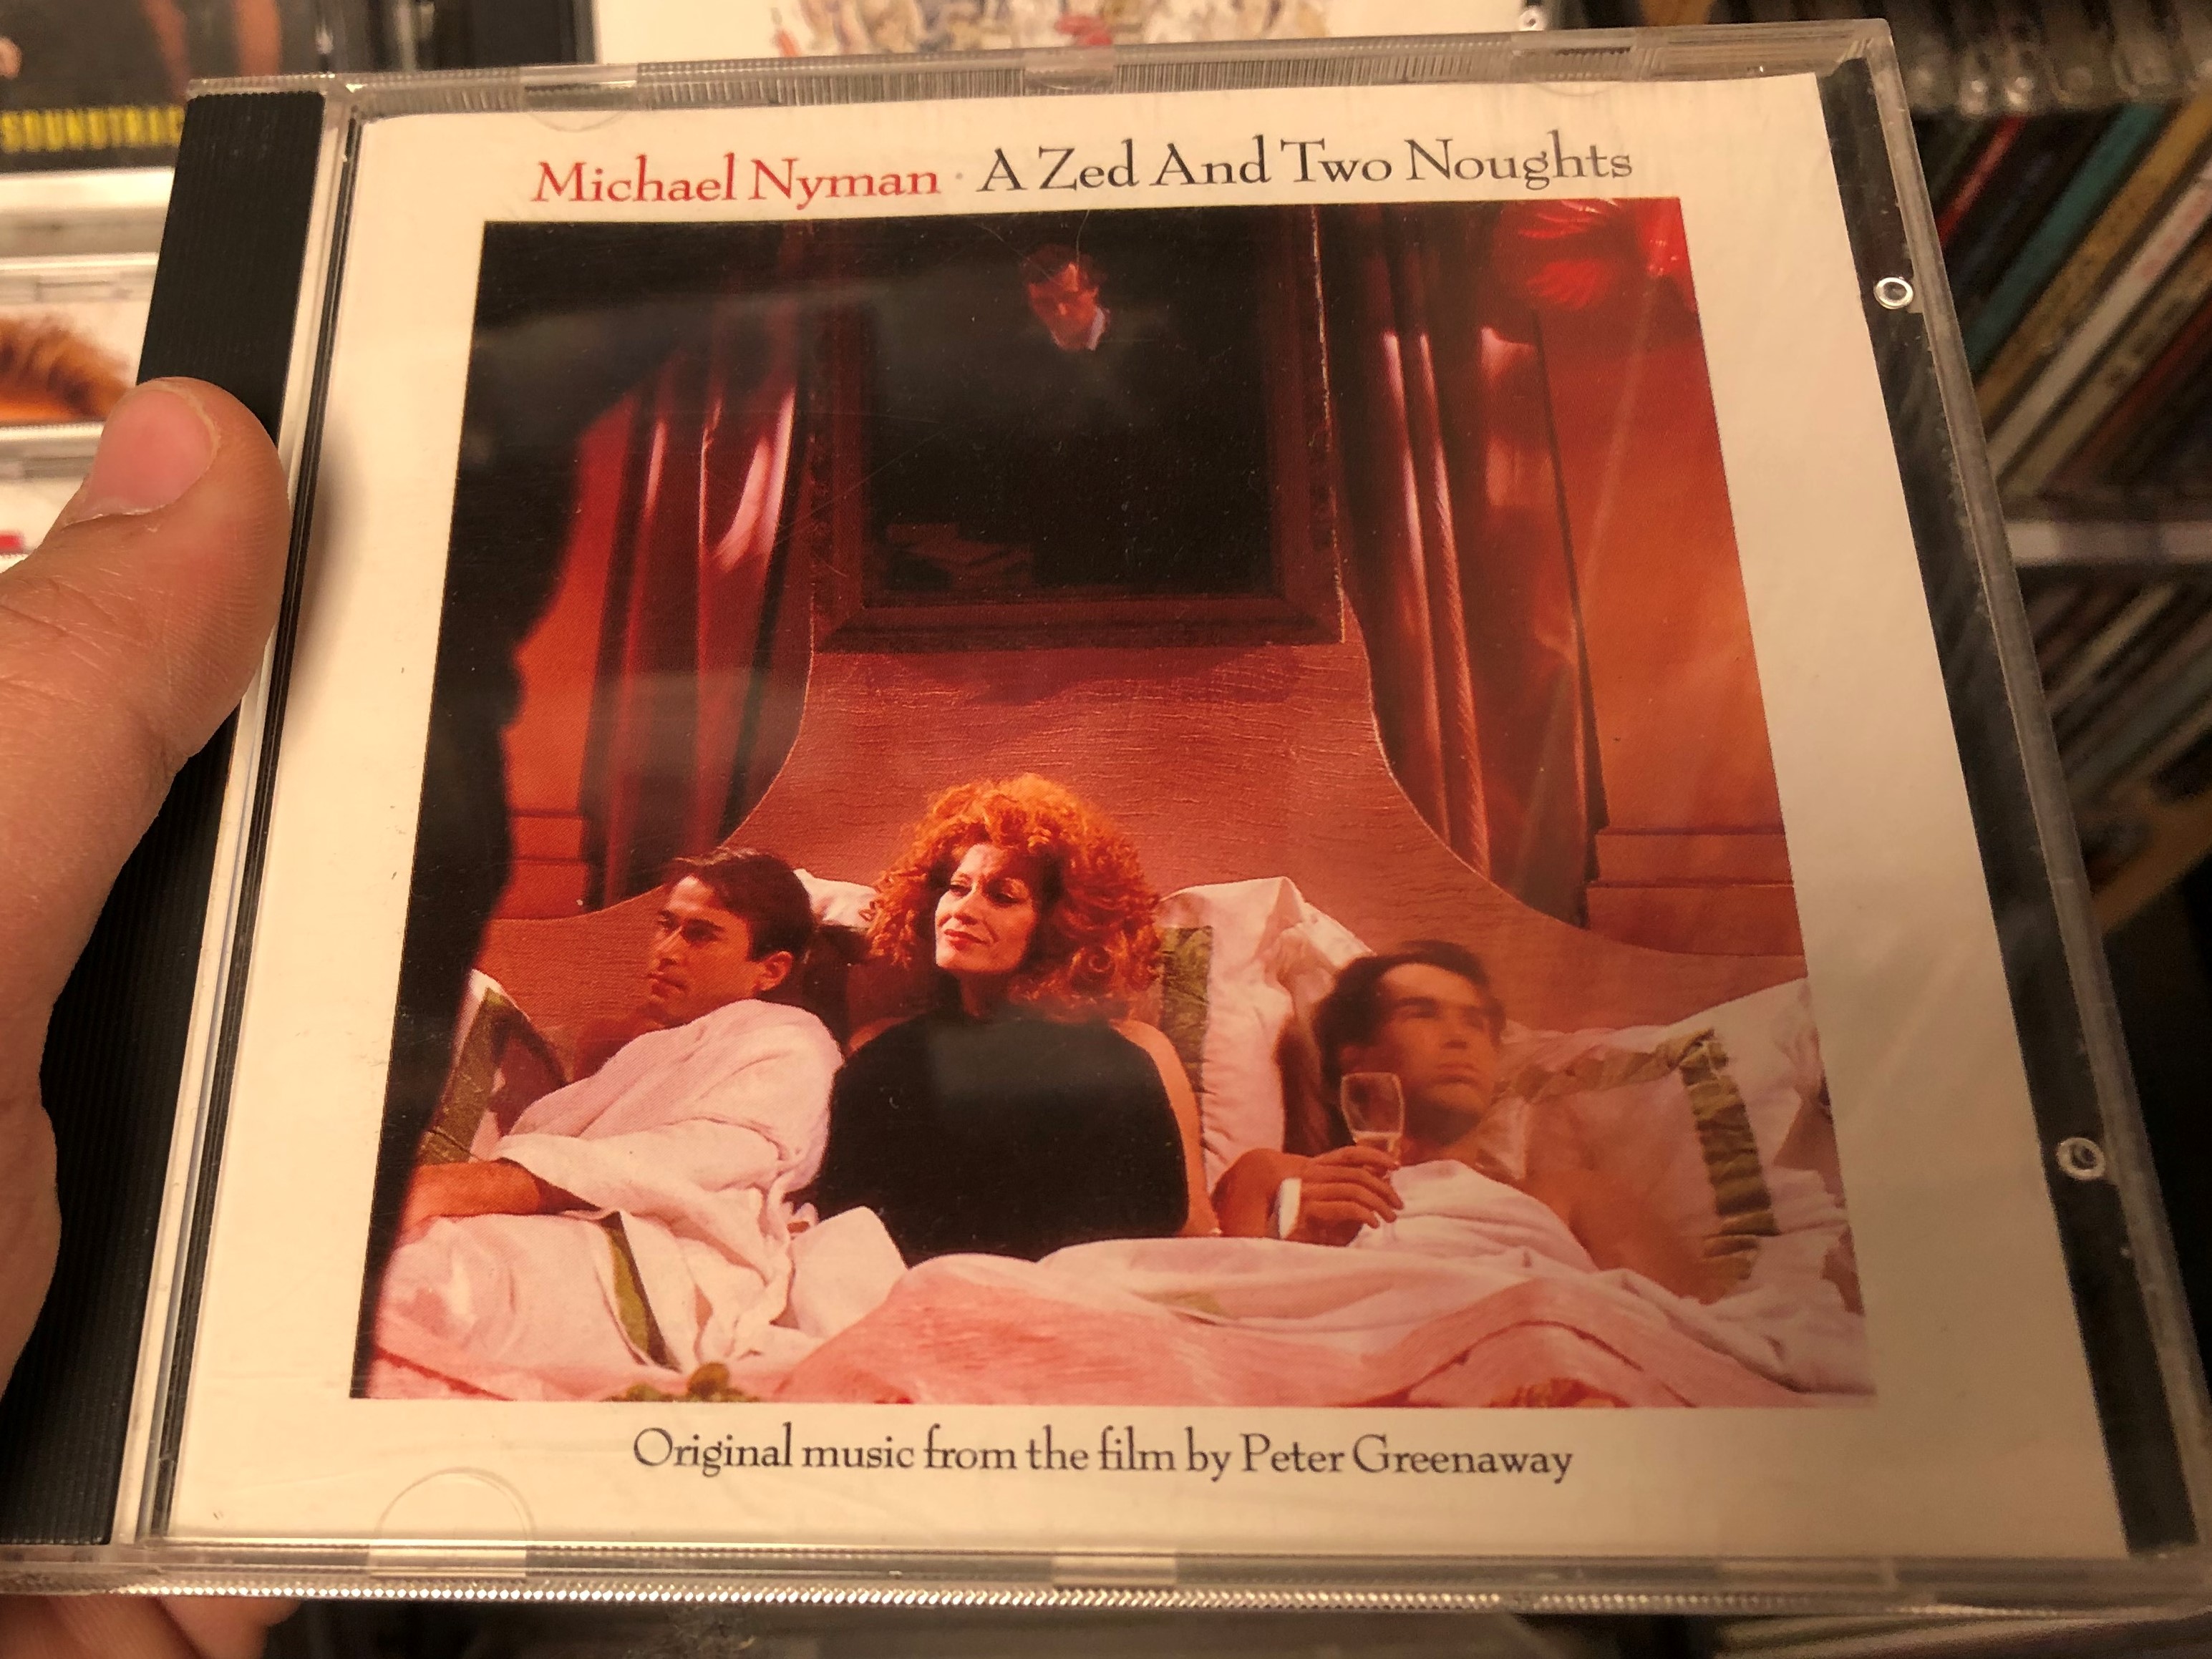 michael-nyman-a-zed-and-two-noughts-original-music-from-the-film-by-peter-greenaway-venture-audio-cd-dvebn-55-2-.jpg